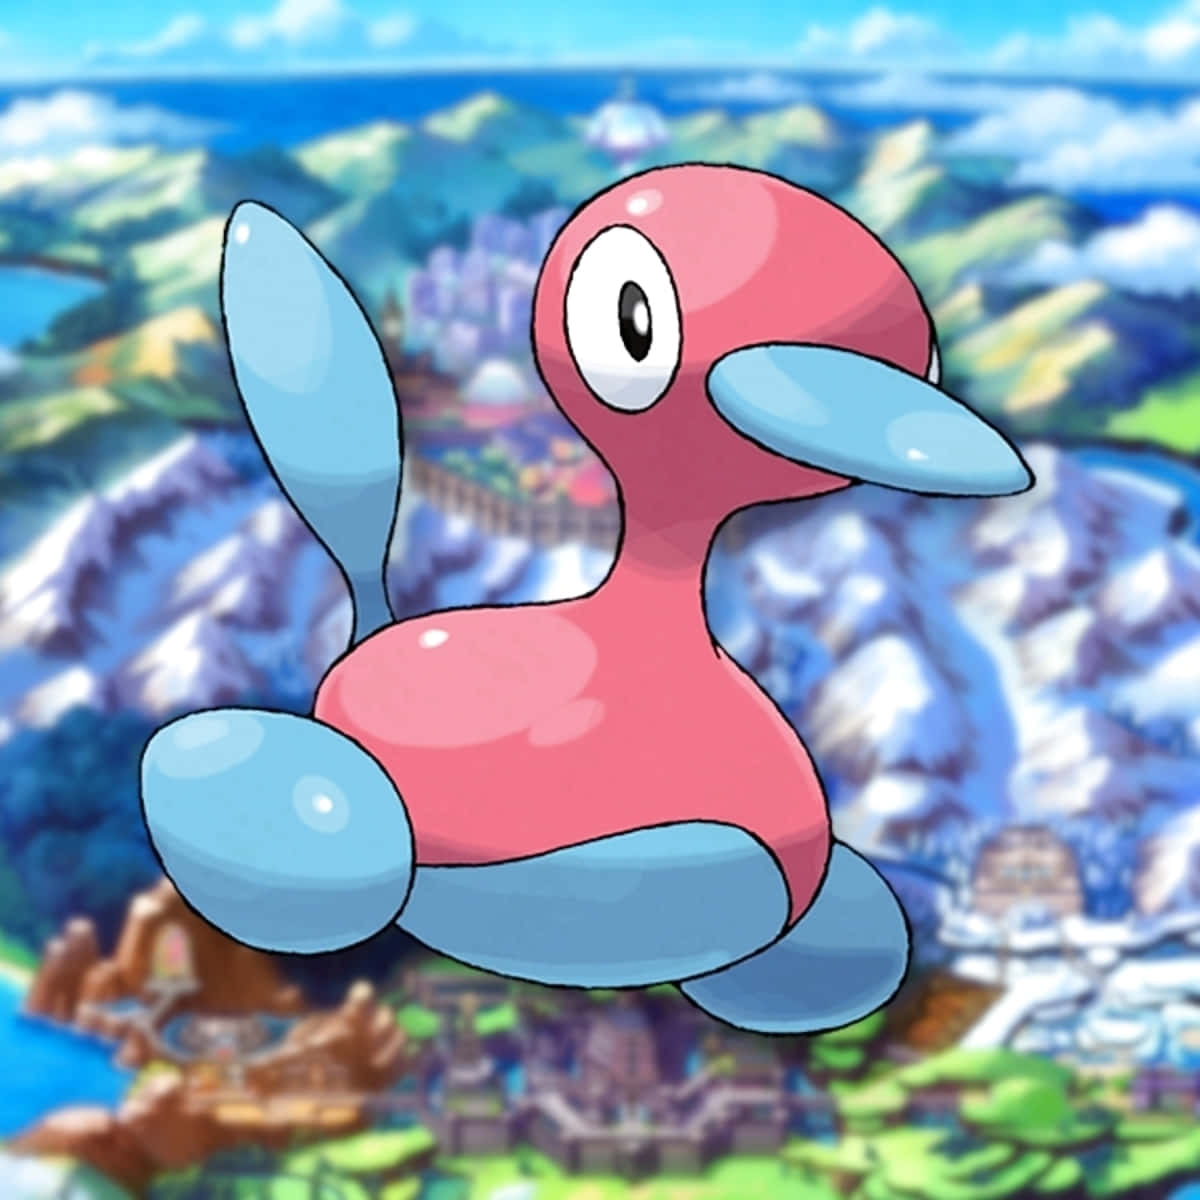 Porygon2 in Action! - A Stunning Digital Pokémon on Blurry Background Wallpaper